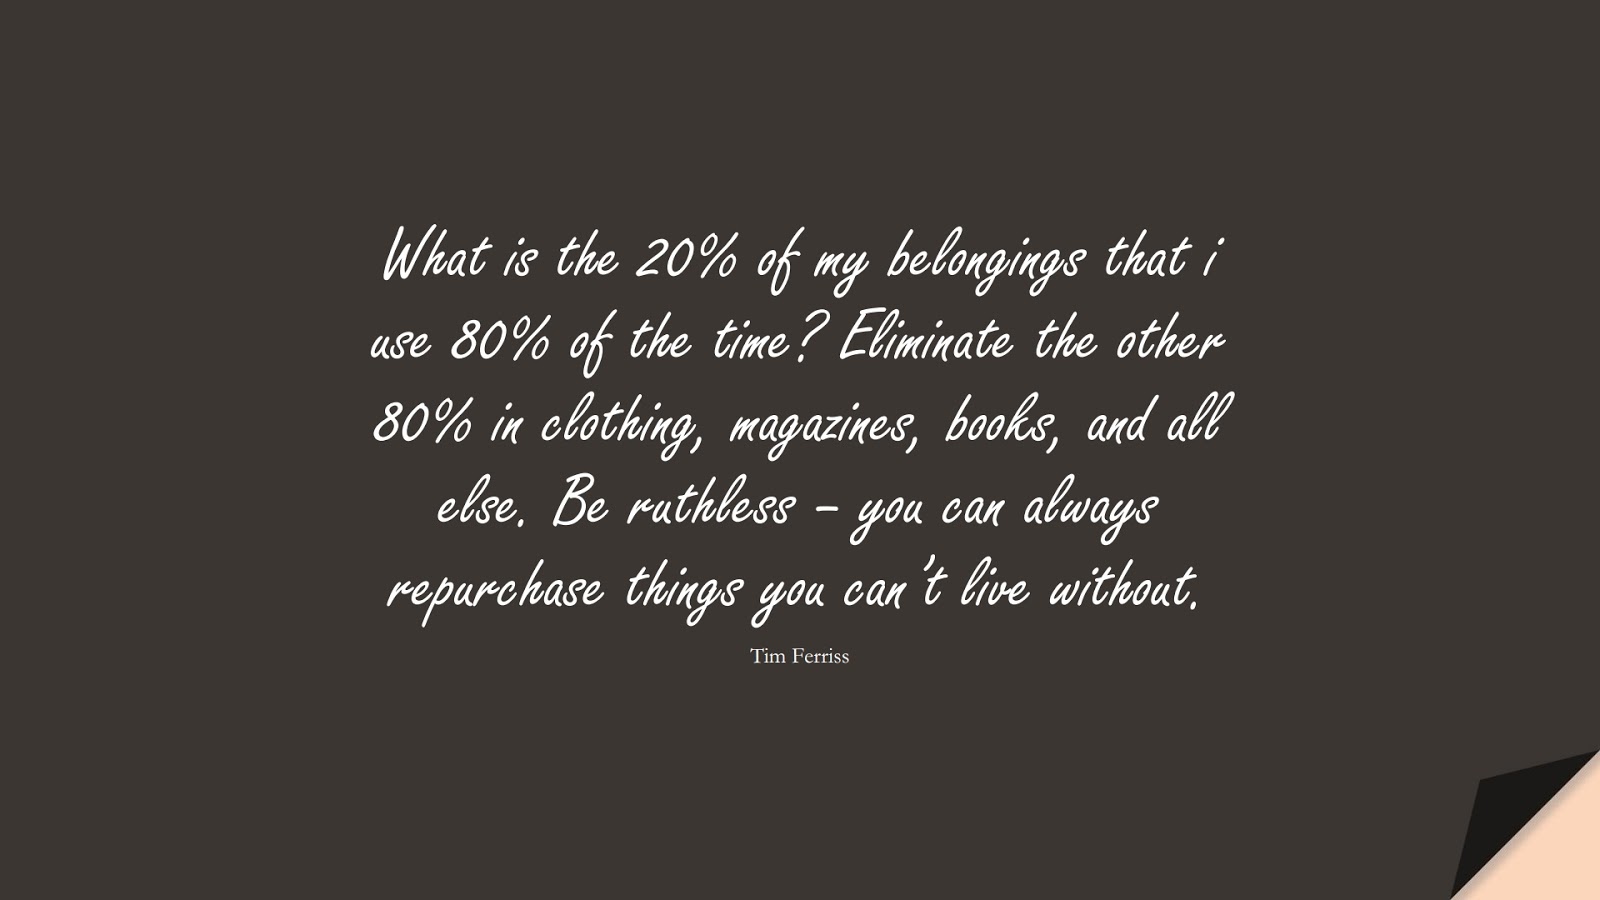 What is the 20% of my belongings that i use 80% of the time? Eliminate the other 80% in clothing, magazines, books, and all else. Be ruthless – you can always repurchase things you can’t live without. (Tim Ferriss);  #TimFerrissQuotes